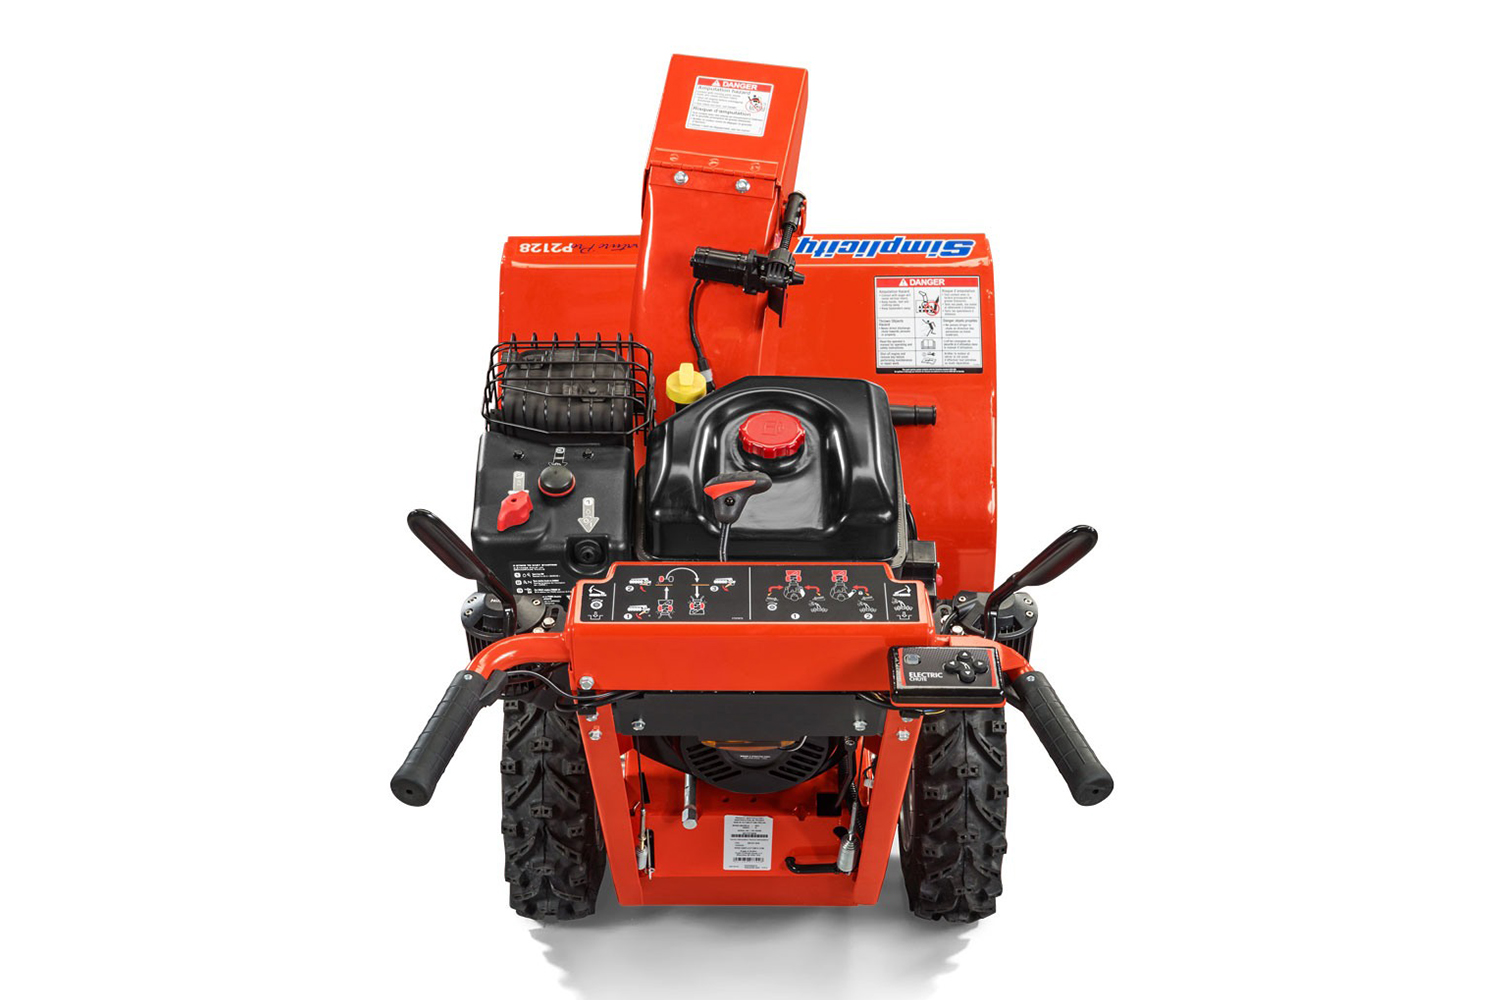 SIMPLICITY SIGNATURE PRO SERIES DUAL-STAGE SNOW BLOWER P2128<br/>*Model shown in image may vary.